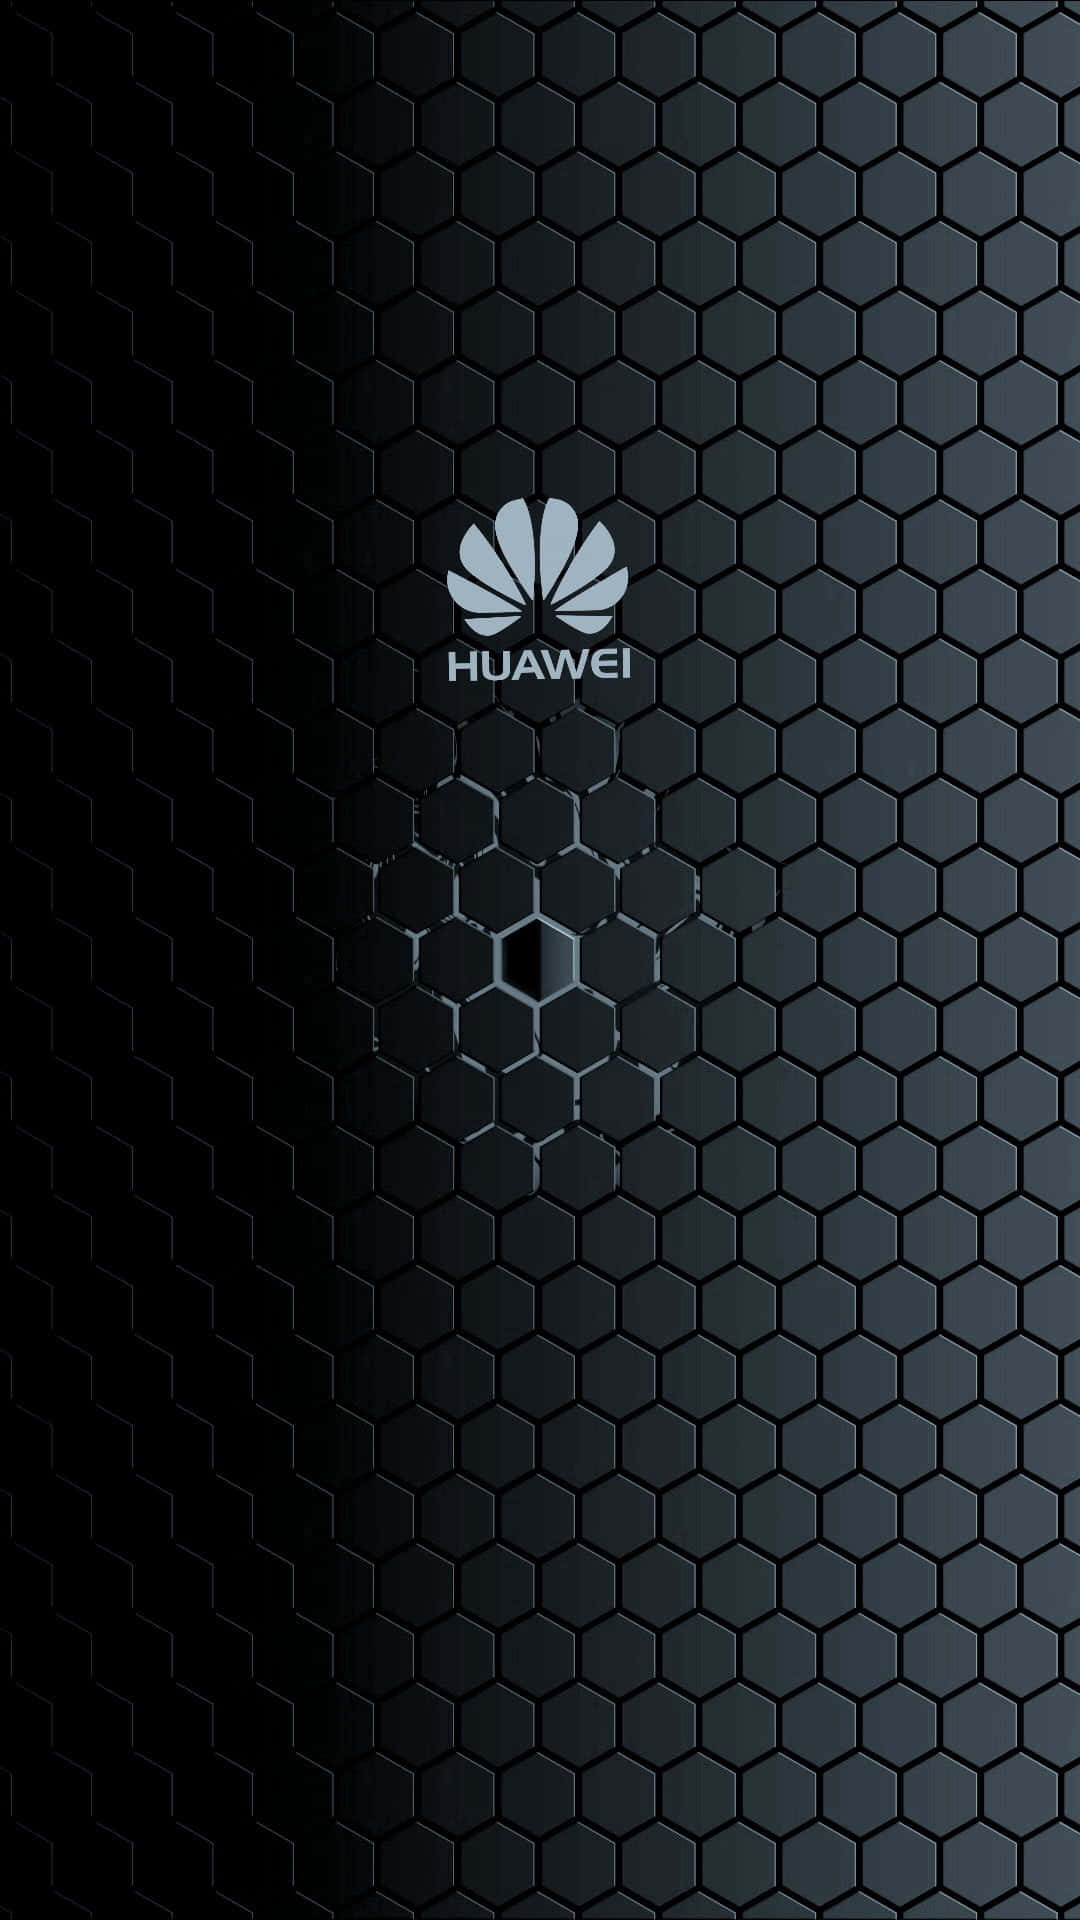 “Industry-Leading Technology by Huawei”